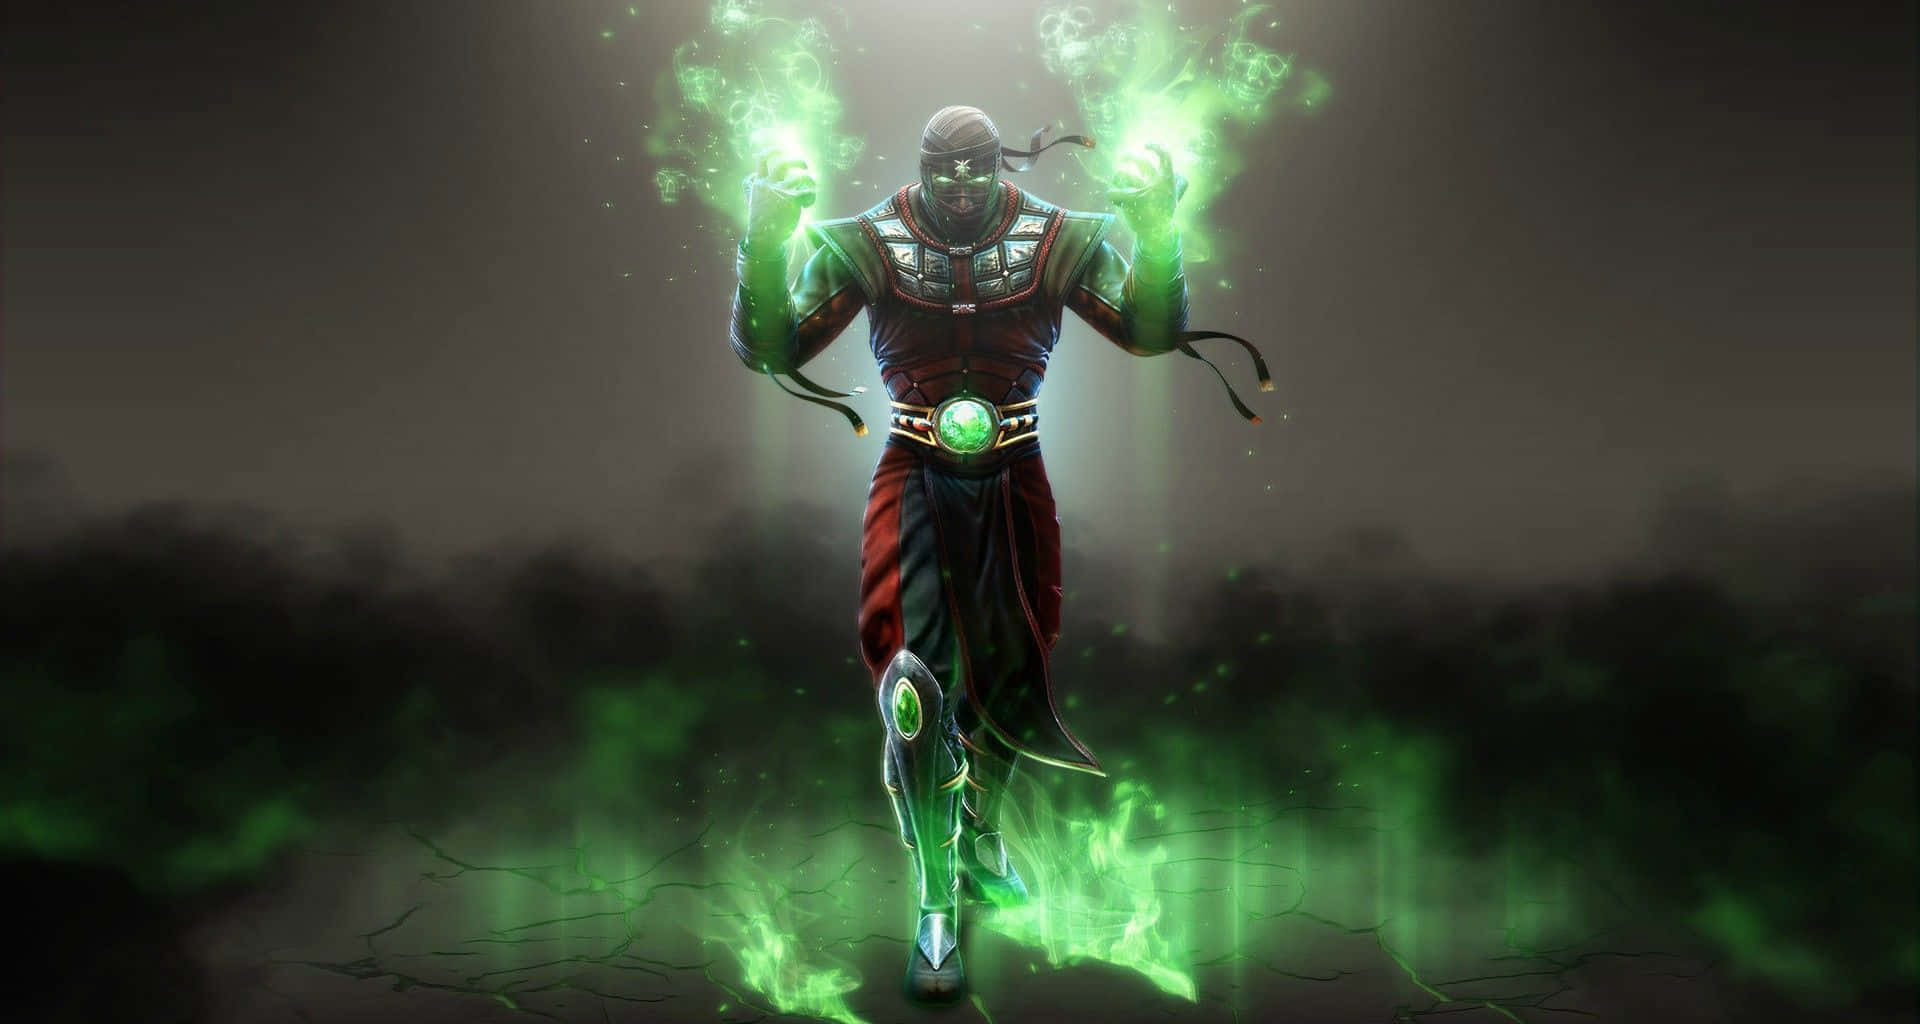 Ermac, the powerful soul-filled warrior from Mortal Kombat. Wallpaper